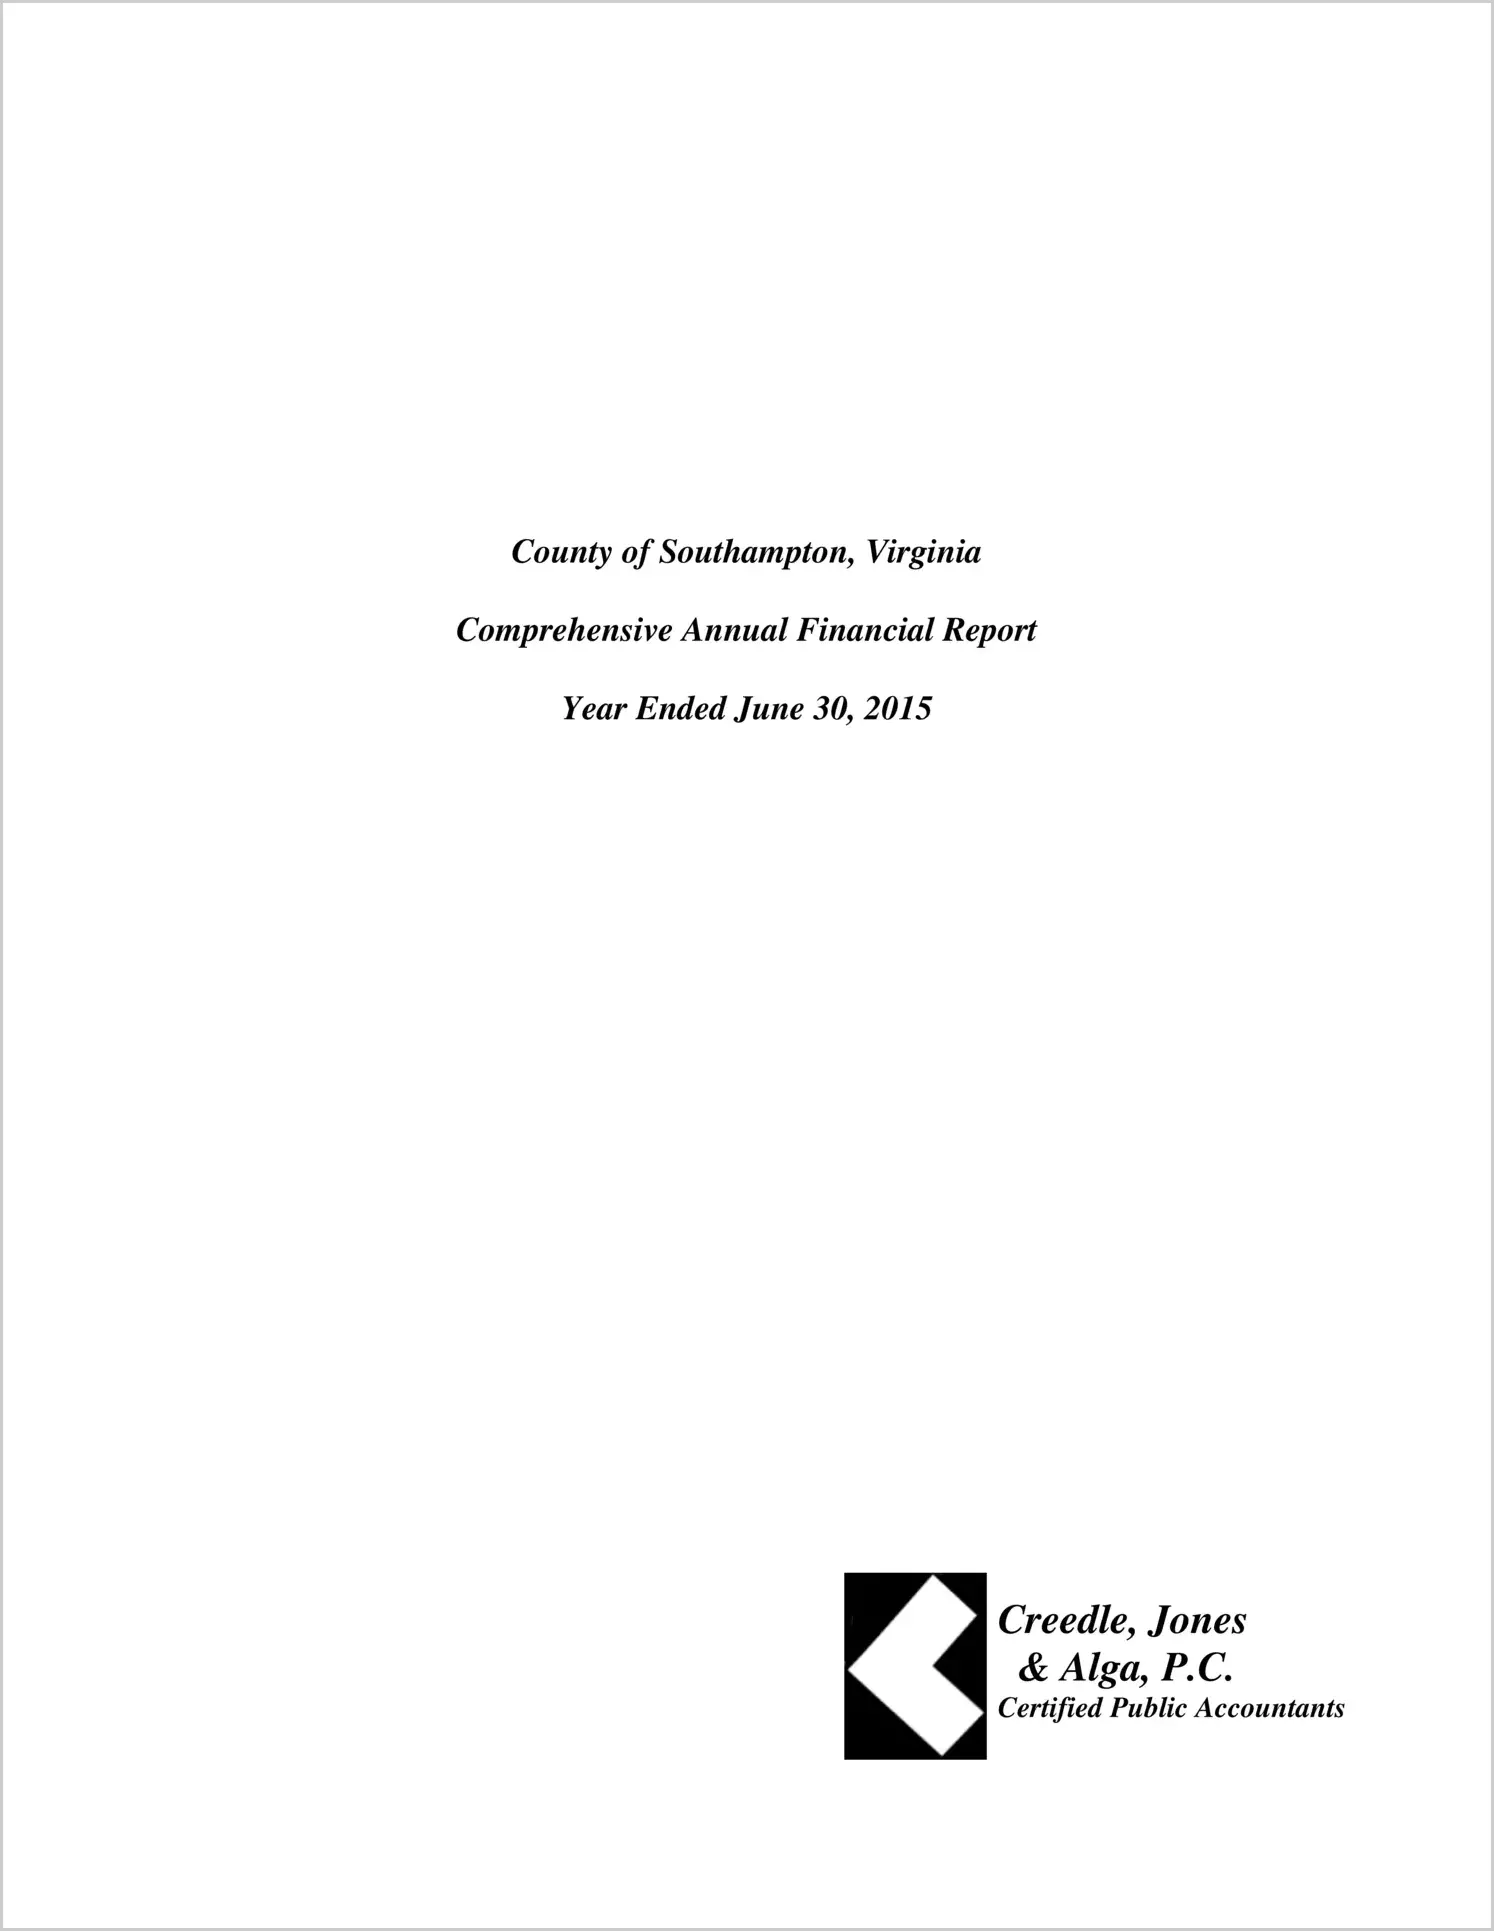 2015 Annual Financial Report for County of Southampton